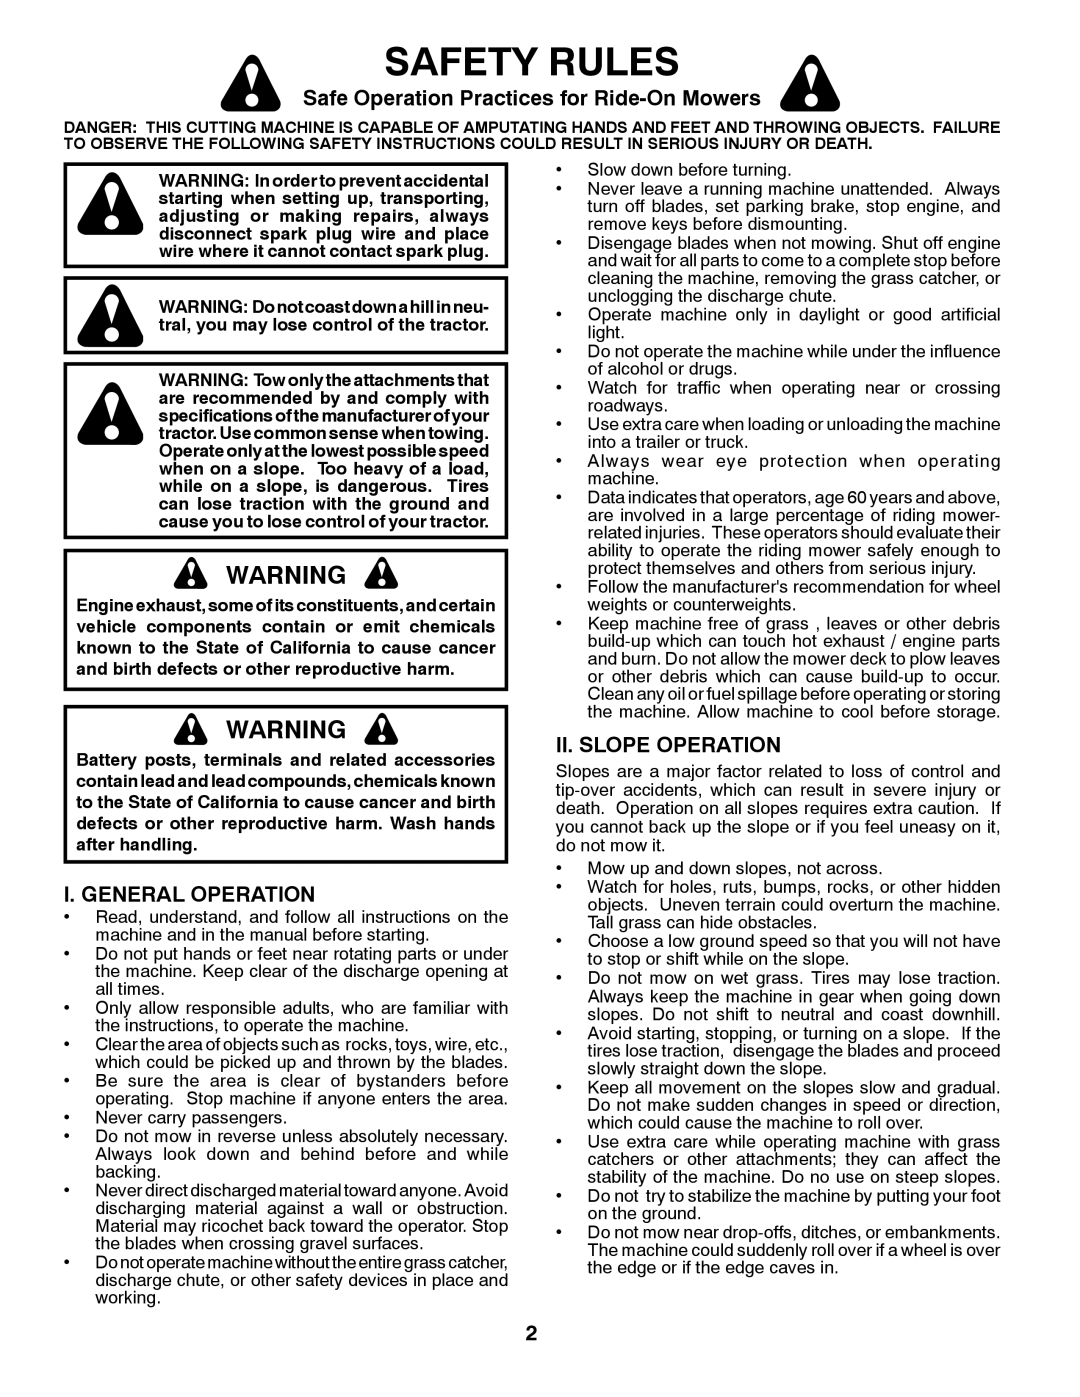 Poulan 532 43 34-32 Safety Rules, Safe Operation Practices for Ride-OnMowers, I. General Operation, Ii. Slope Operation 